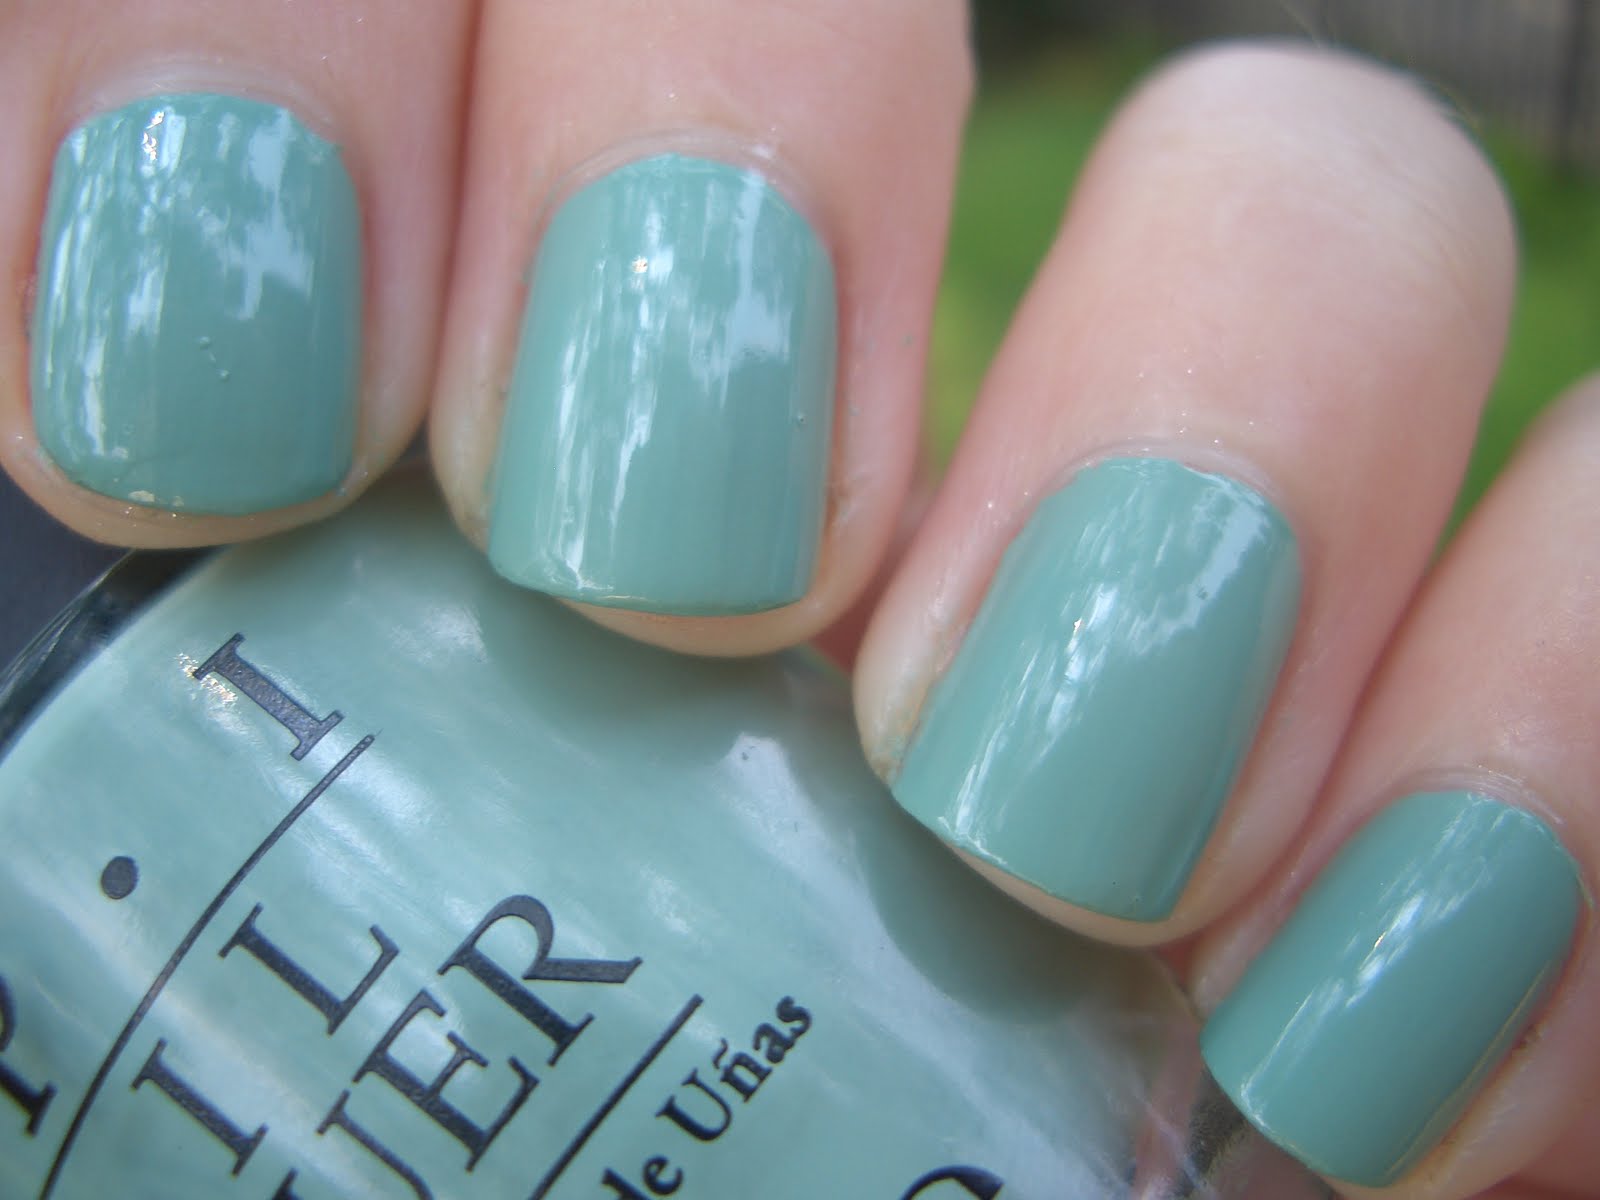 3. OPI Nail Lacquer in "Mermaid's Tears" - wide 5